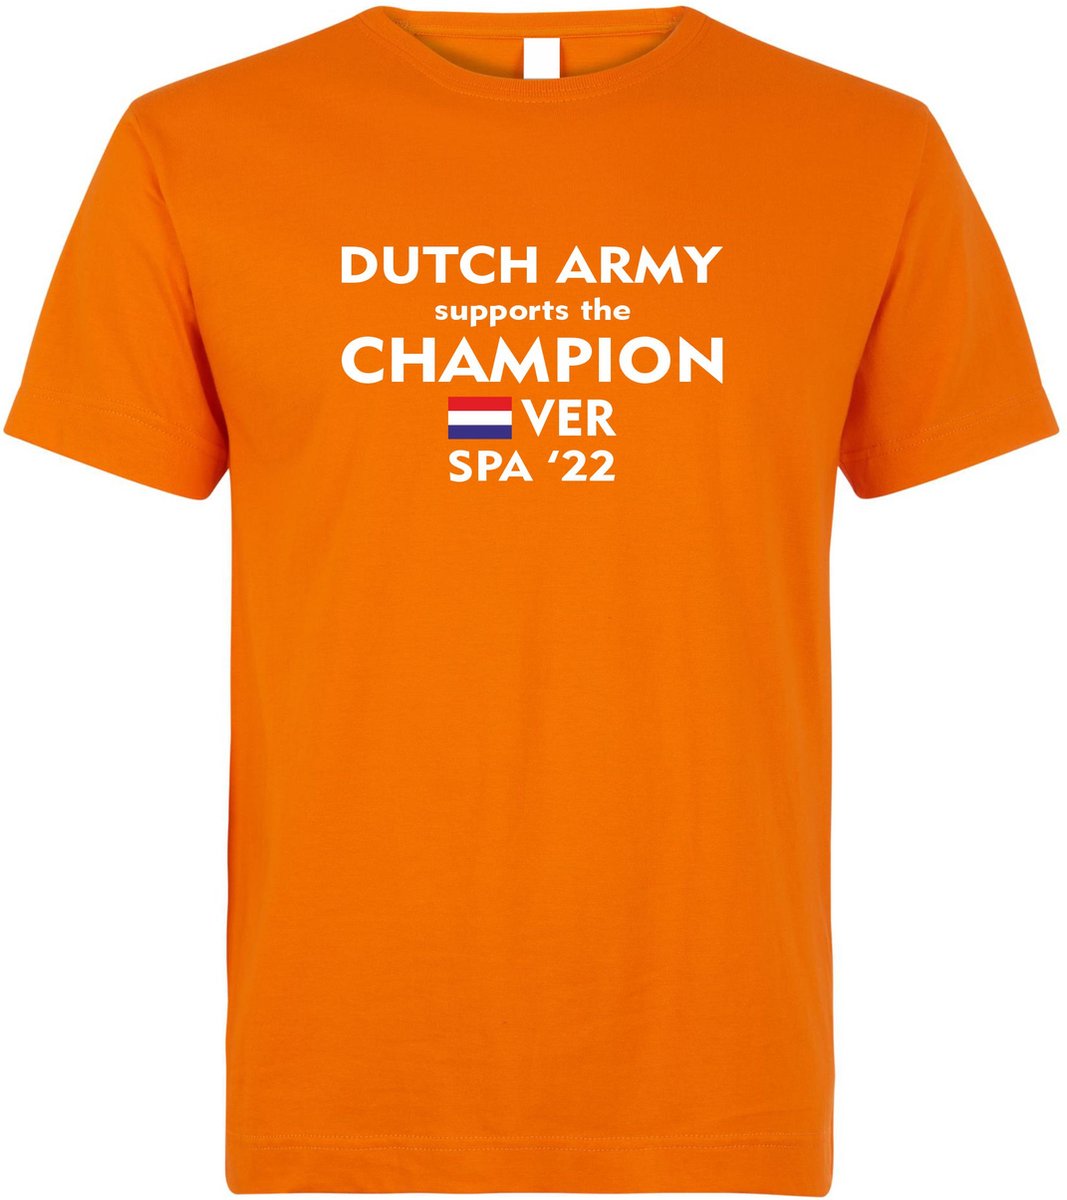 T-shirt Dutch Army supports the Champion Spa 22 | Max Verstappen / Red Bull Racing / Formule 1 fan | Grand Prix Circuit Spa-Francorchamps | kleding shirt | Oranje | maat M